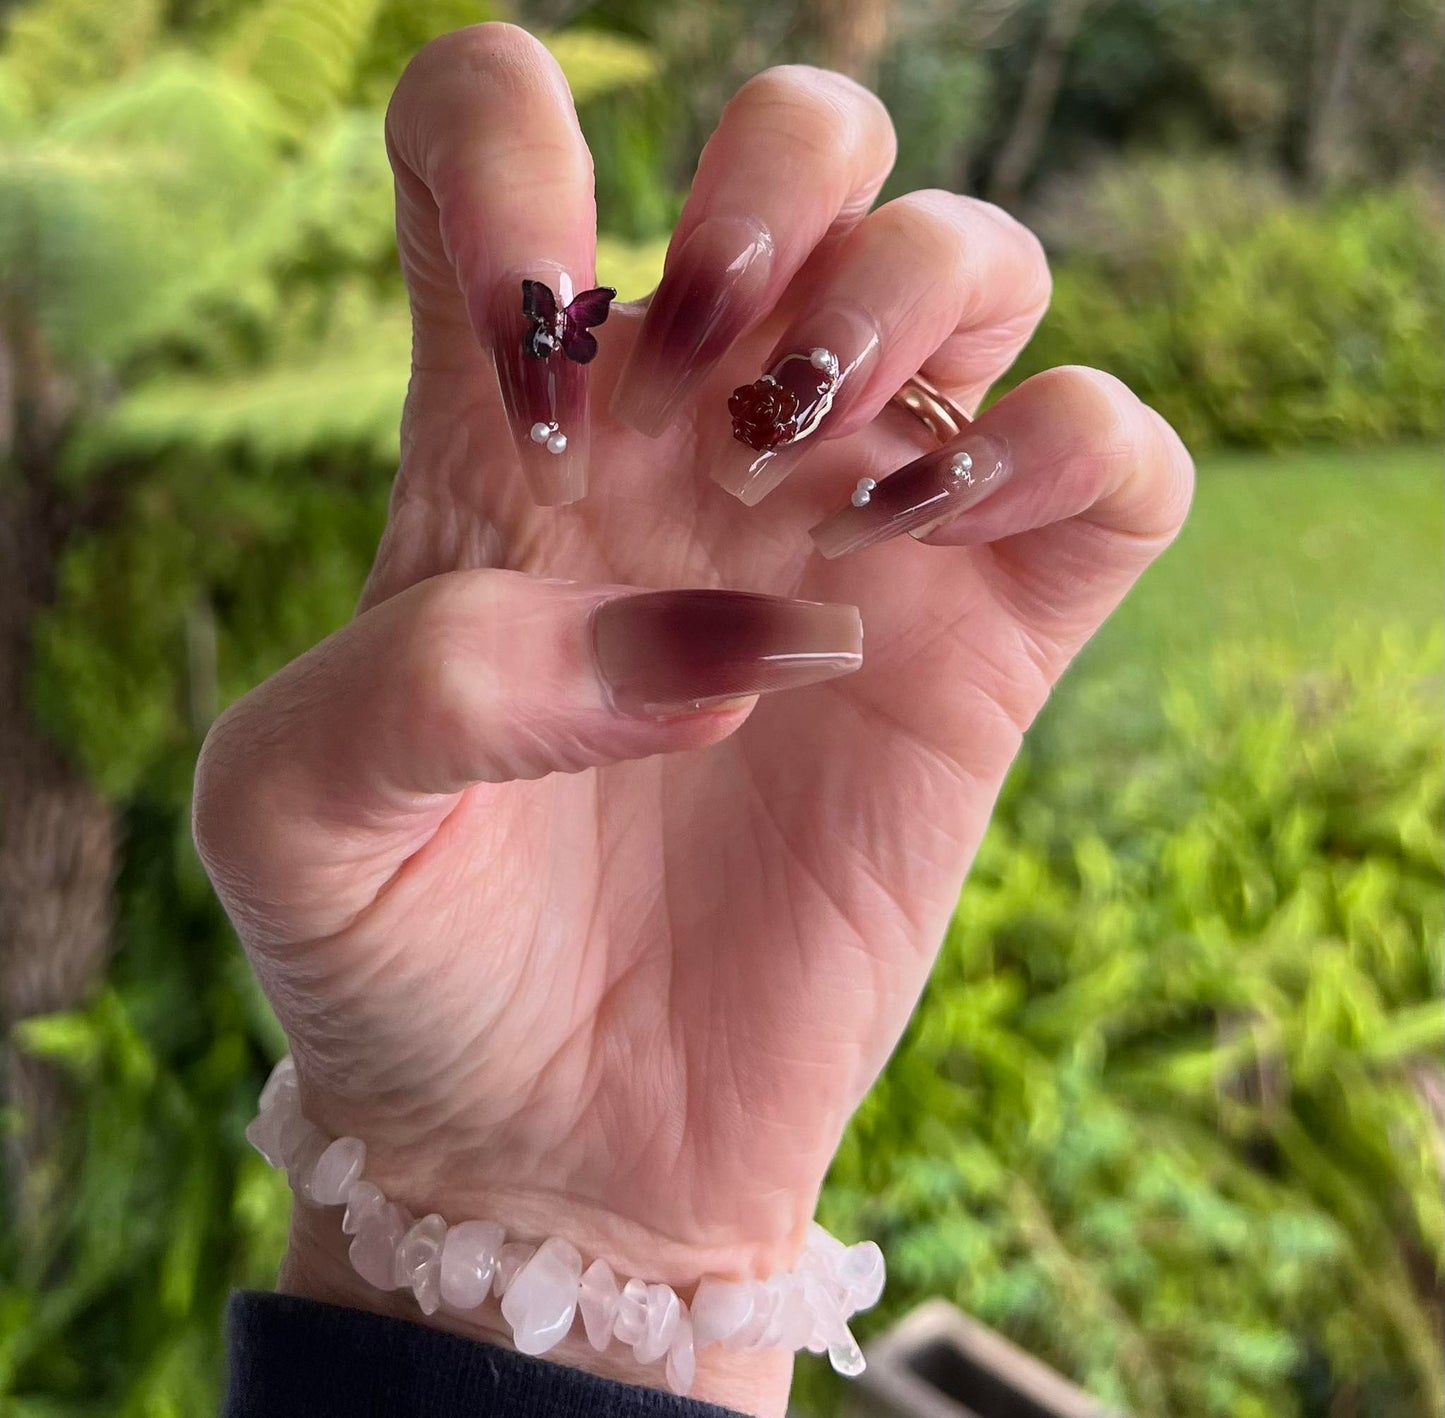 Long Coffin Press on Nails. Deep Plum, Clear Tips with Jewels, Butteflies & Flowers. Easy and quick to apply. Great for those special occasions, parties or add an edge to any outfit. Gorgeous, flattering and you can re-use them again and again.